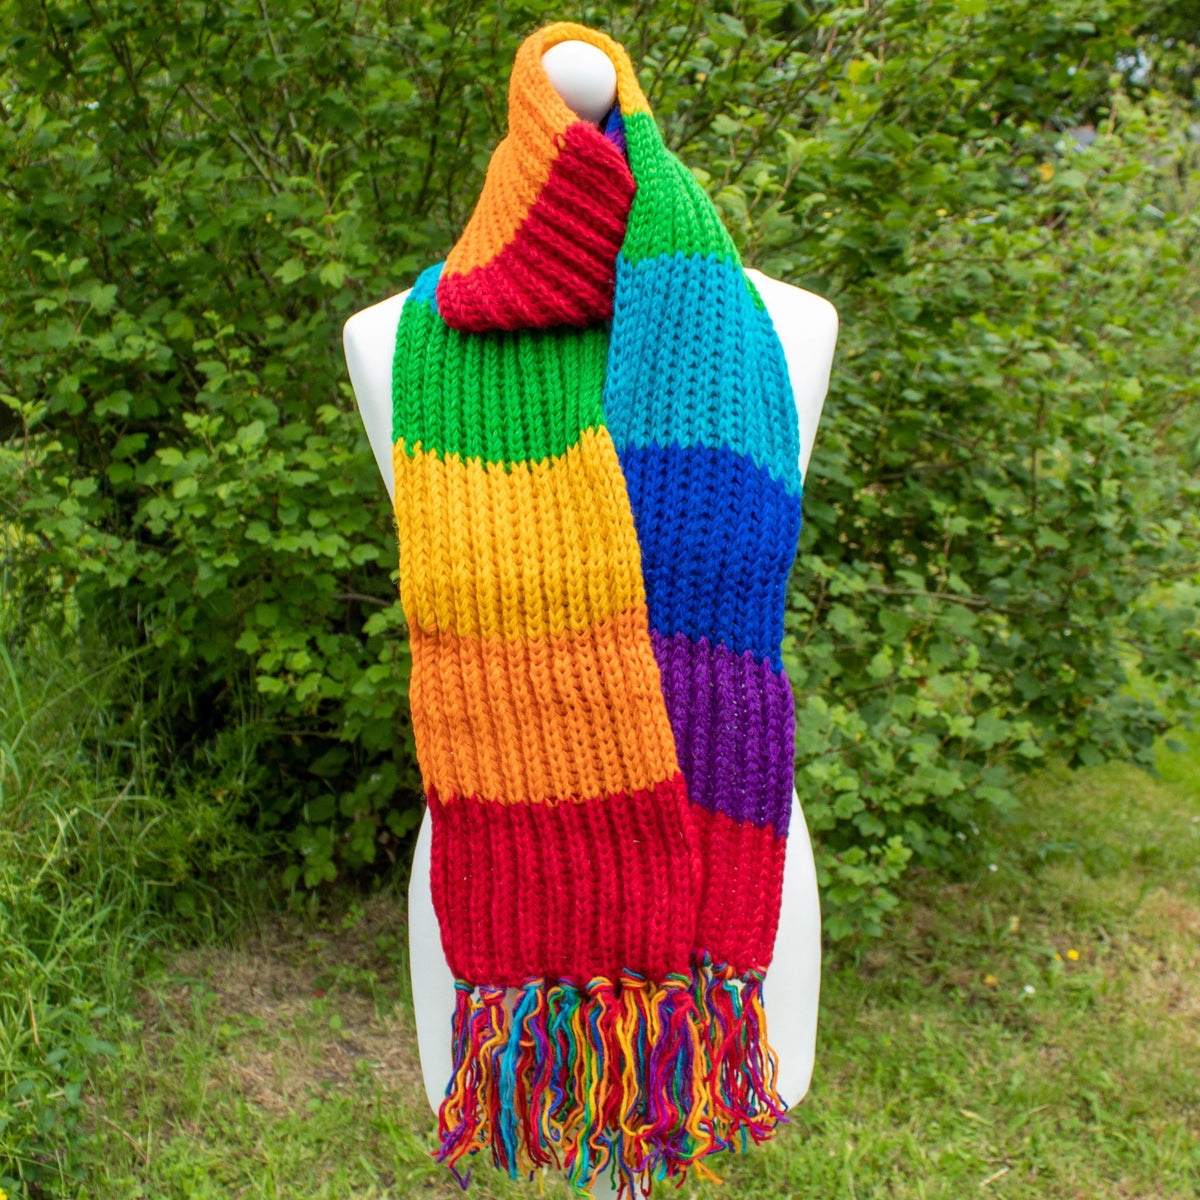 Rainbow Knitted Wool Scarf | Scarf - The Naughty Shrew